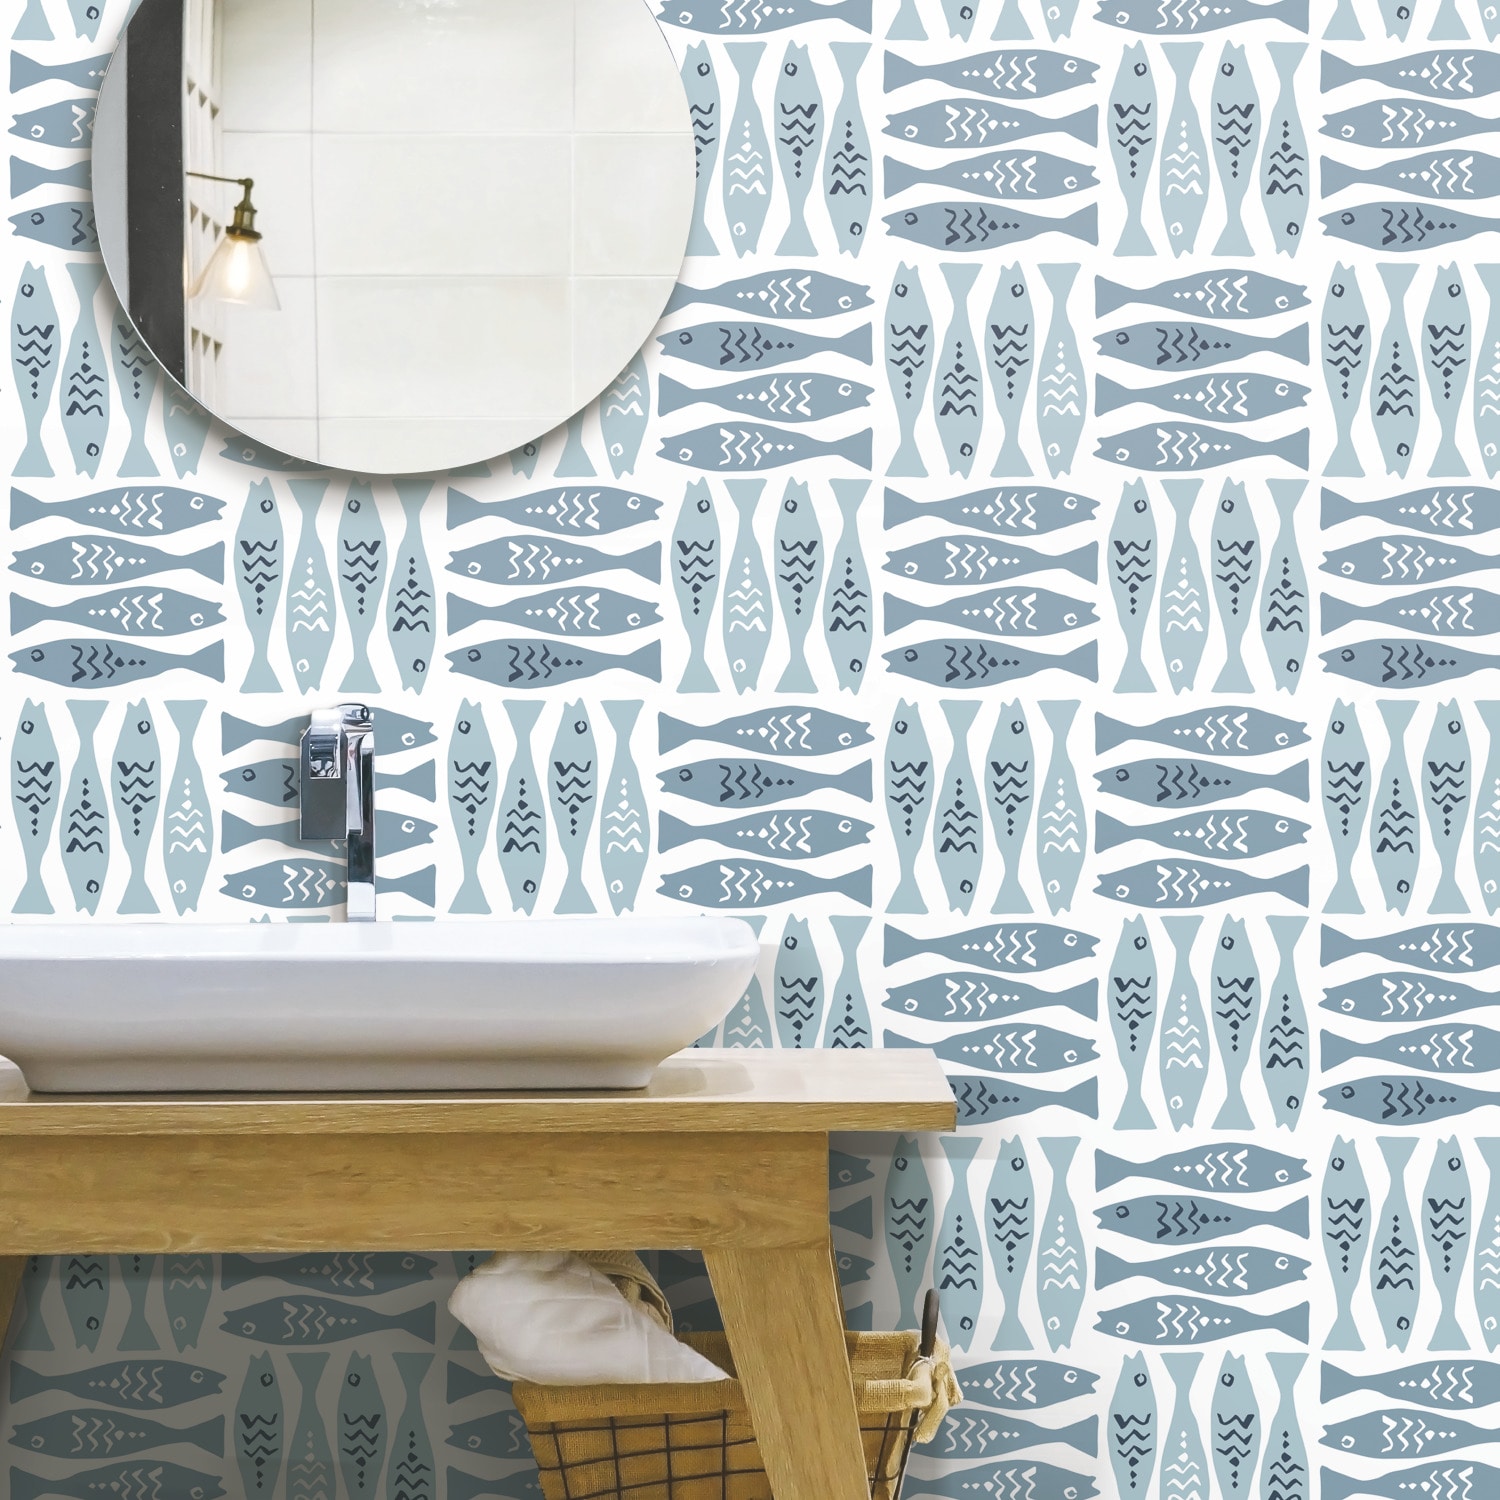 NextWall Koi Fish 216 x 205 Peel and Stick Wallpaper in Metallic  Champagne and Grey  NFM